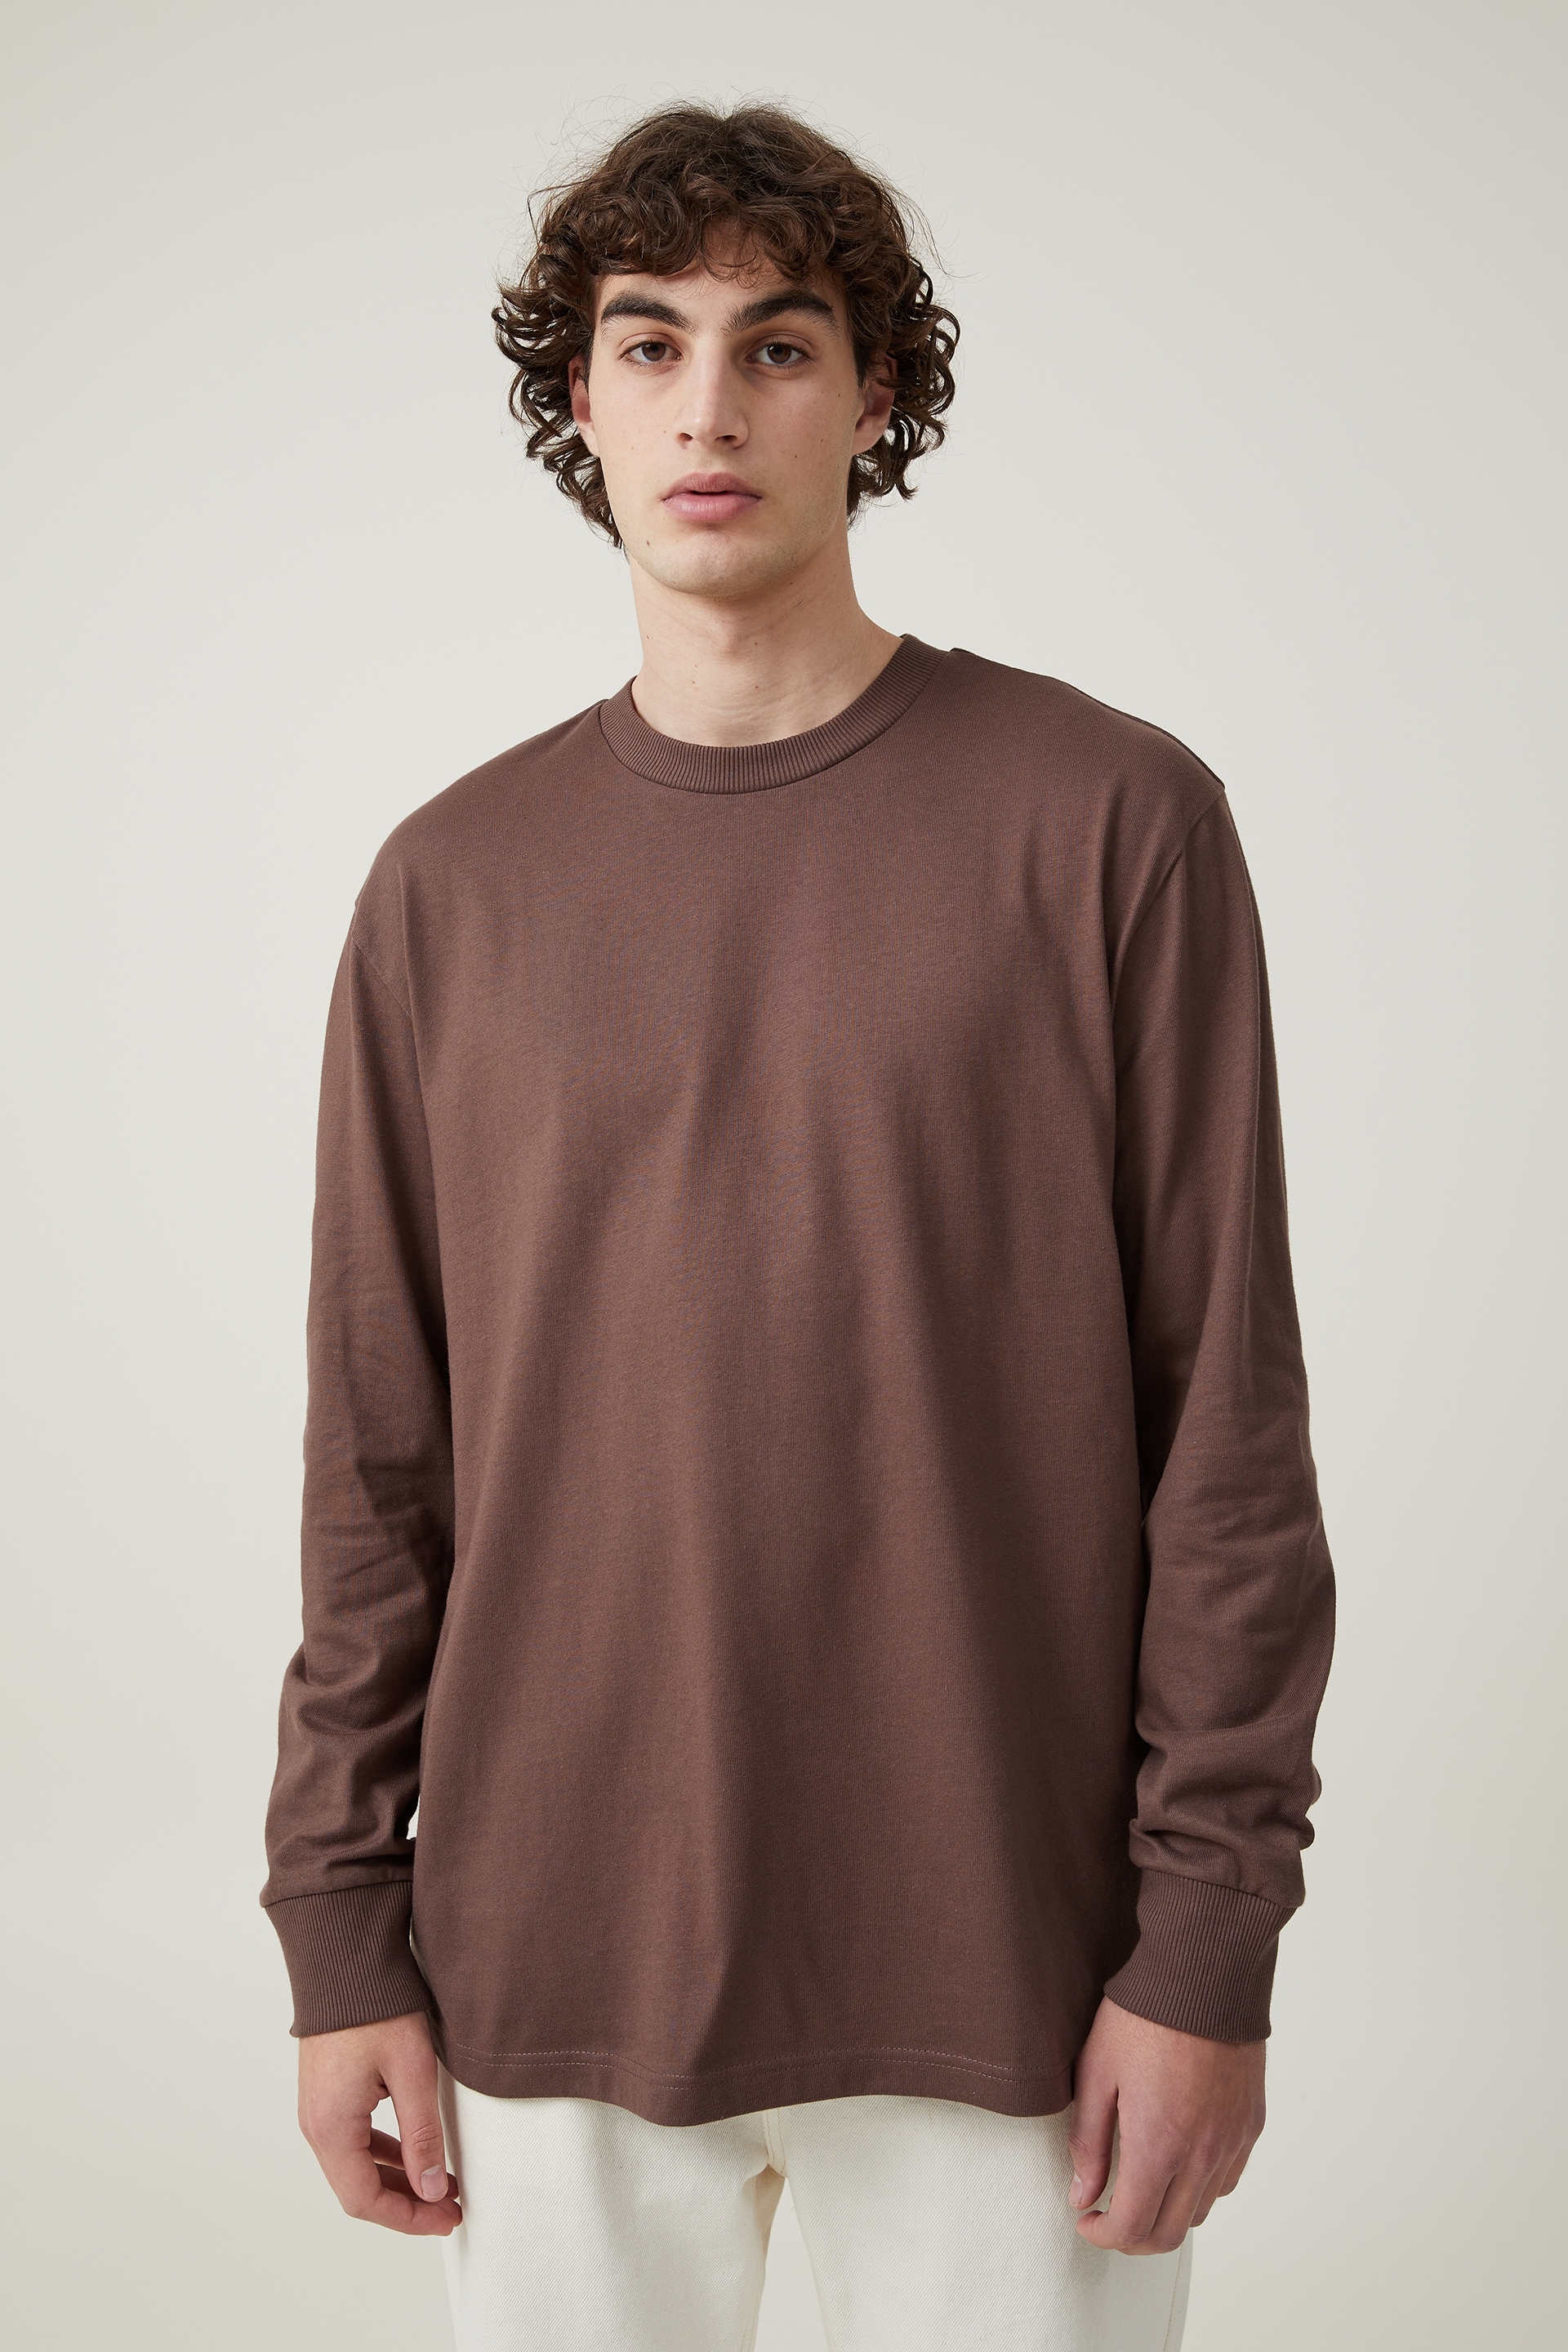 Cotton On Men - Loose Fit Long Sleeve Tshirt - Washed chocolate